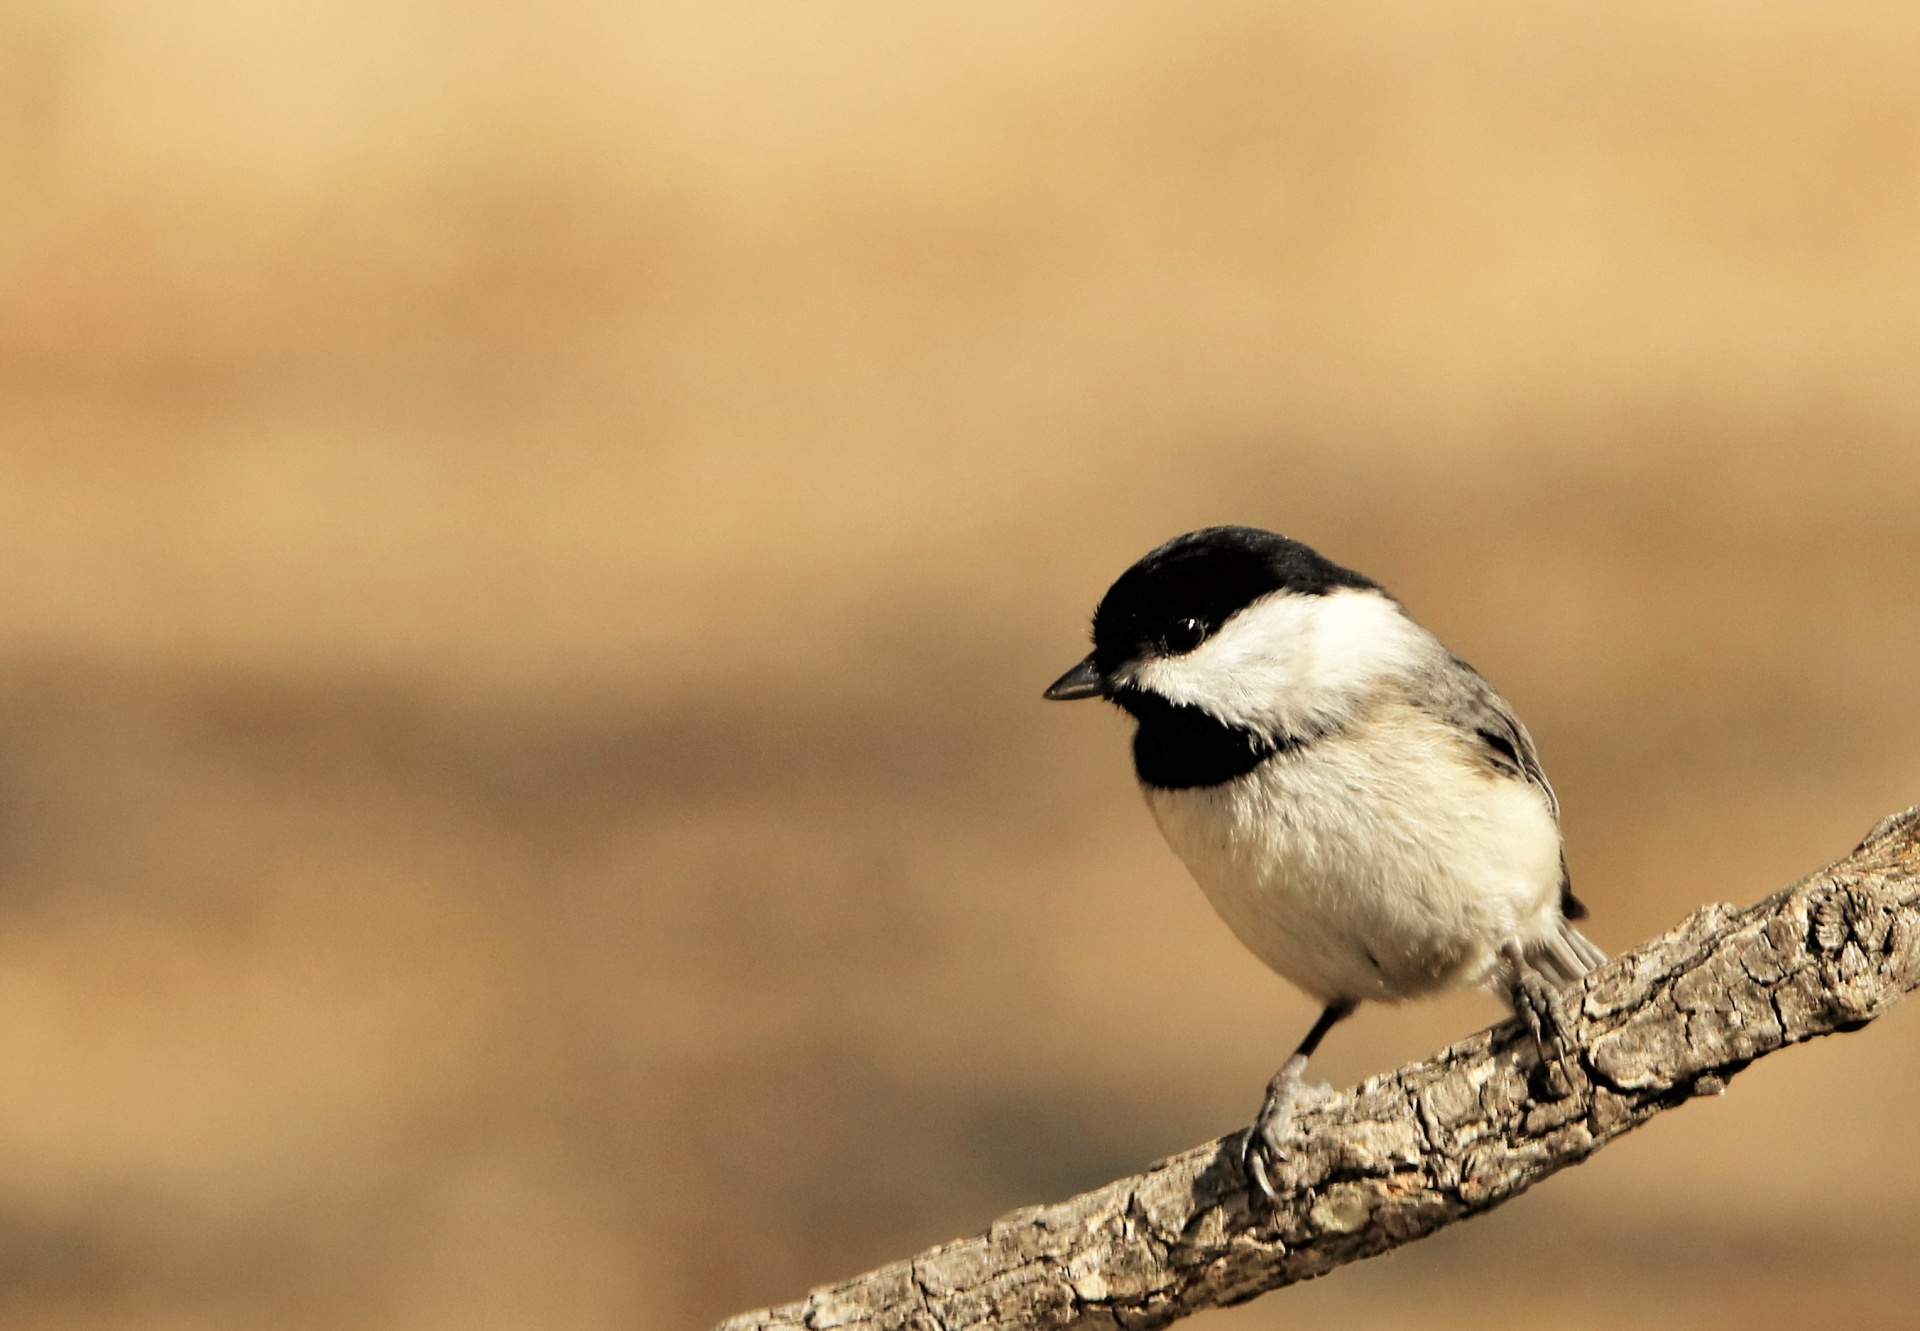 Close-up of a cute little black-capped chickadee as he sits on a tree branch on a blurred brown background, with room for text.